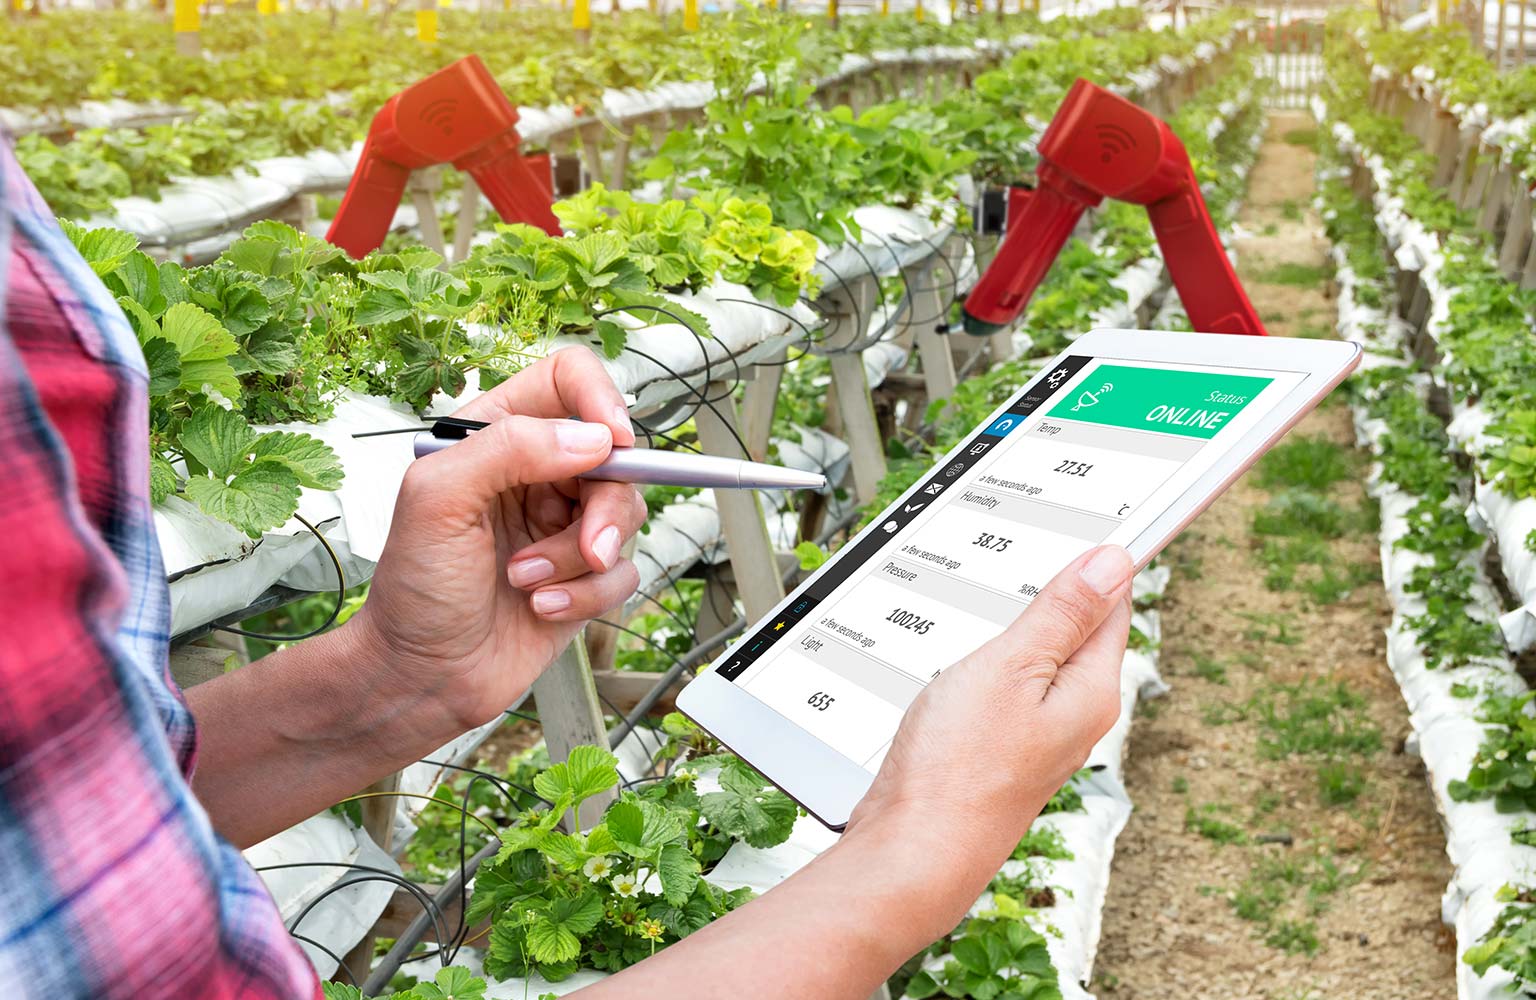 IoT in farming mobile dashboards